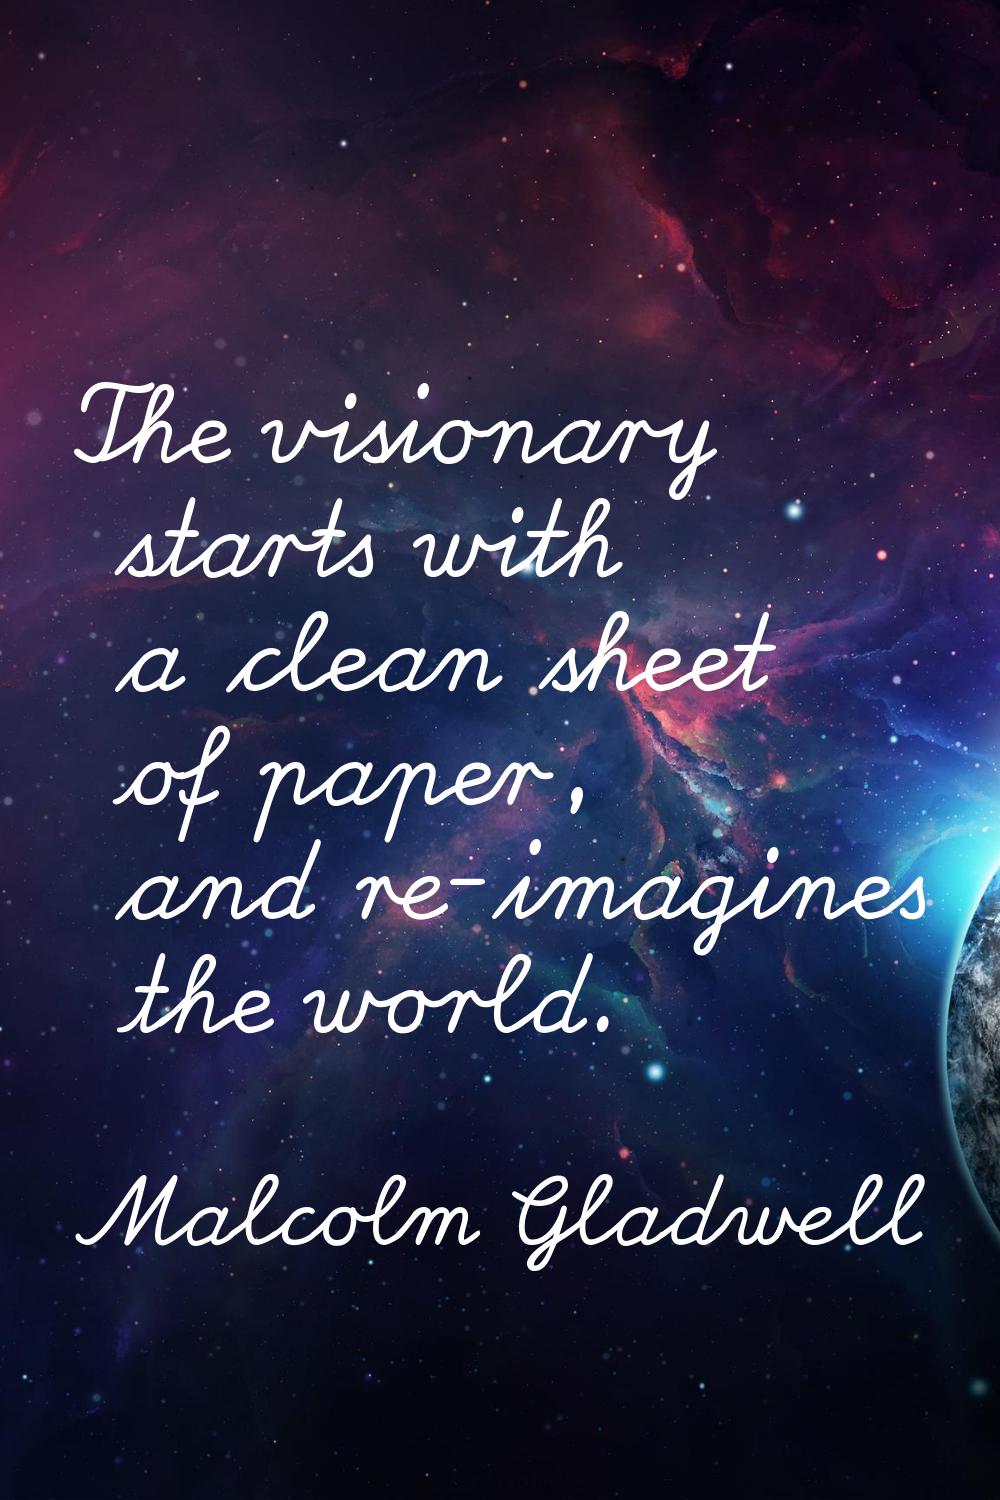 The visionary starts with a clean sheet of paper, and re-imagines the world.